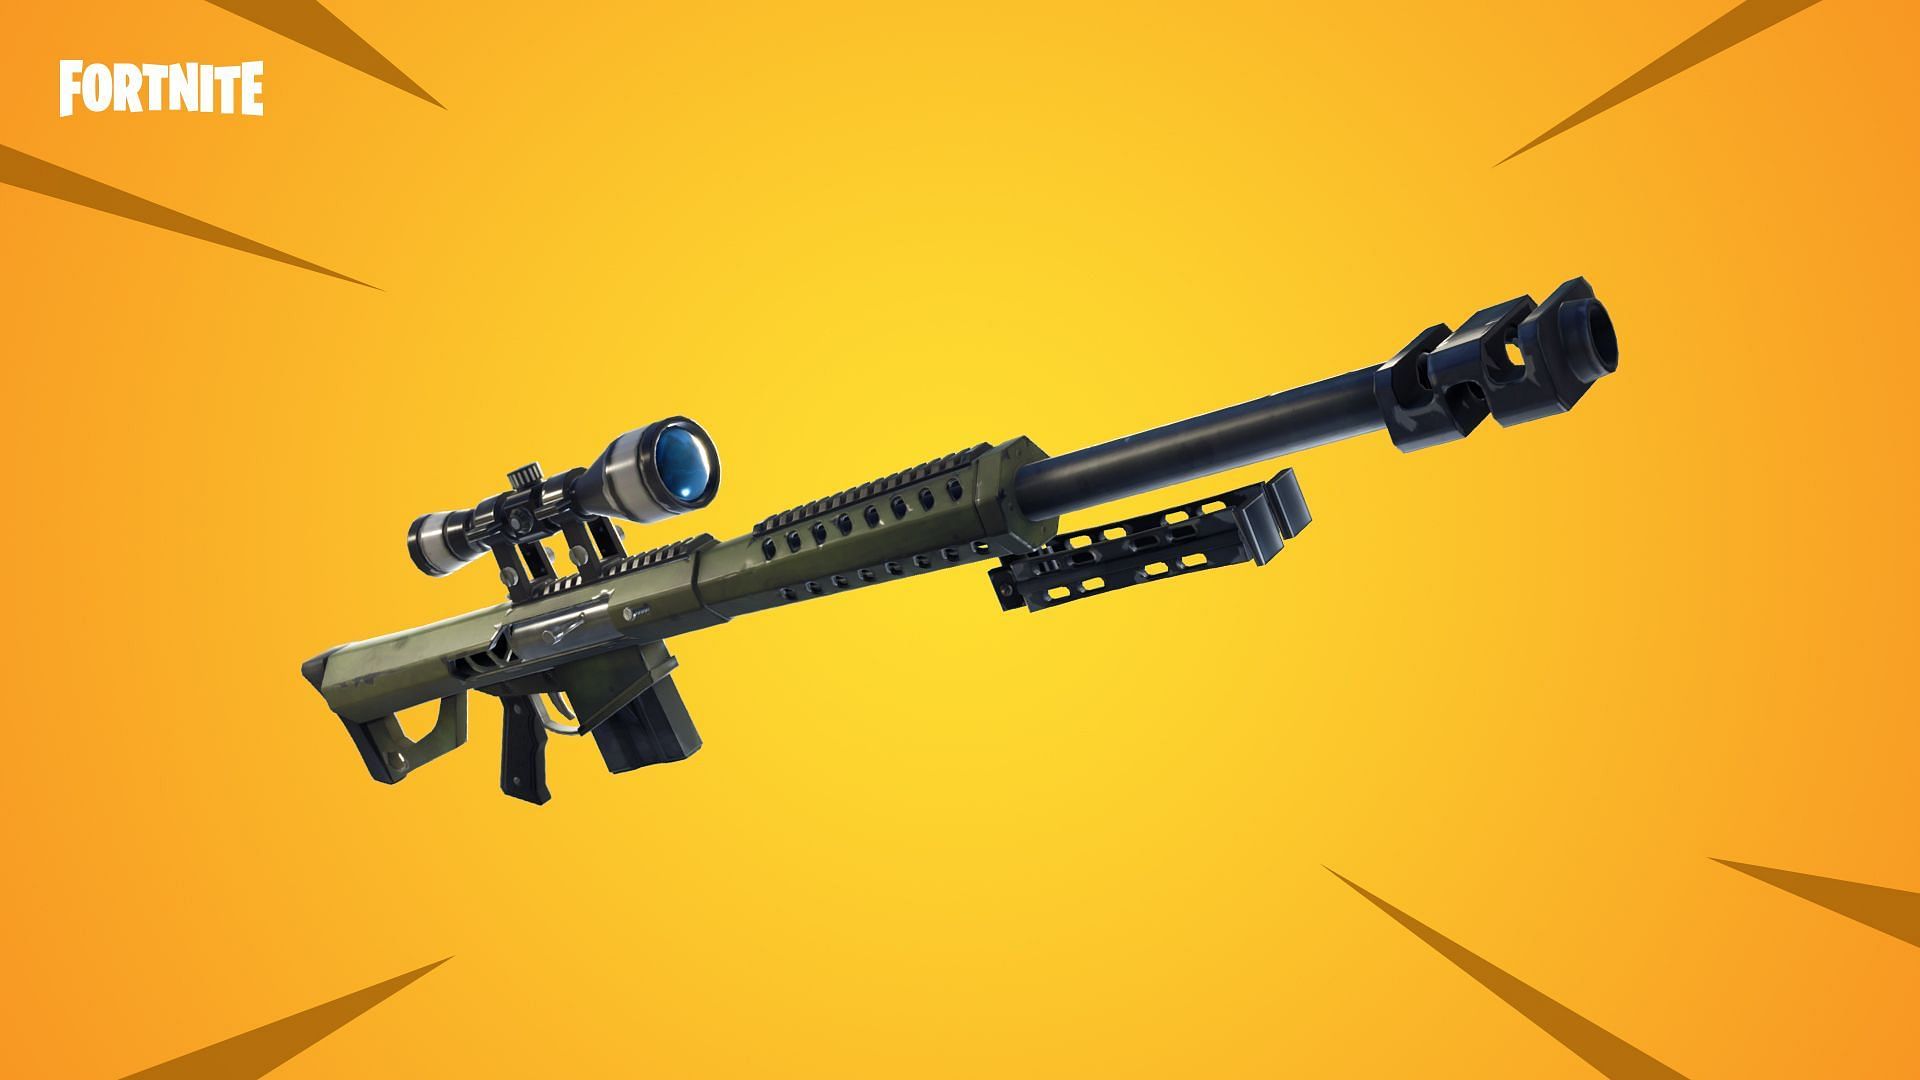 Fortnite players have to collect Epic tier weapons or higher for the latest challenge (Image via Epic Games)